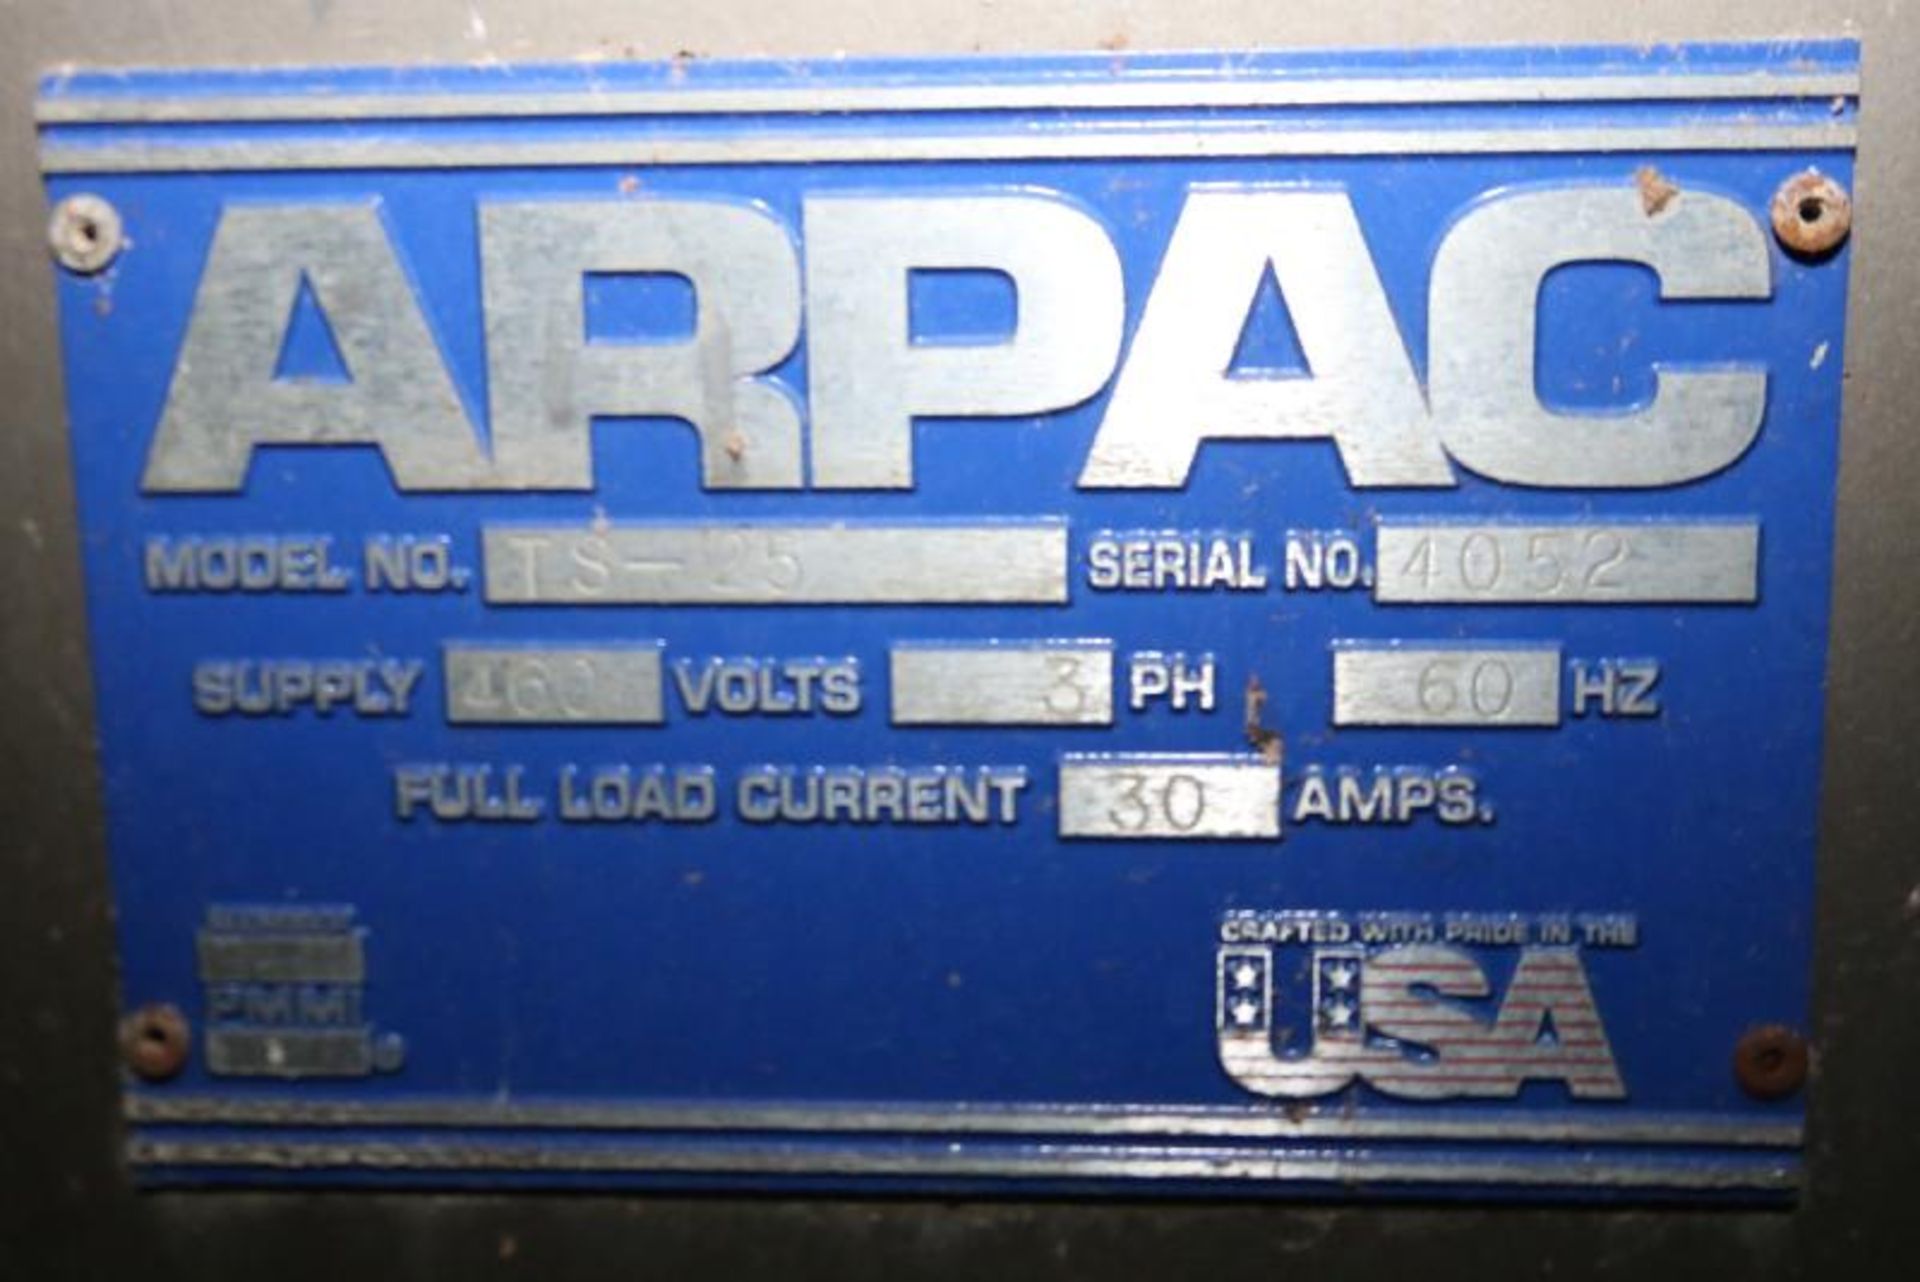 2000 Arpac Corrugated Tray Former / Packer, Model TS-25, S/N 4052, with Change Grid, Nordson - Image 15 of 15